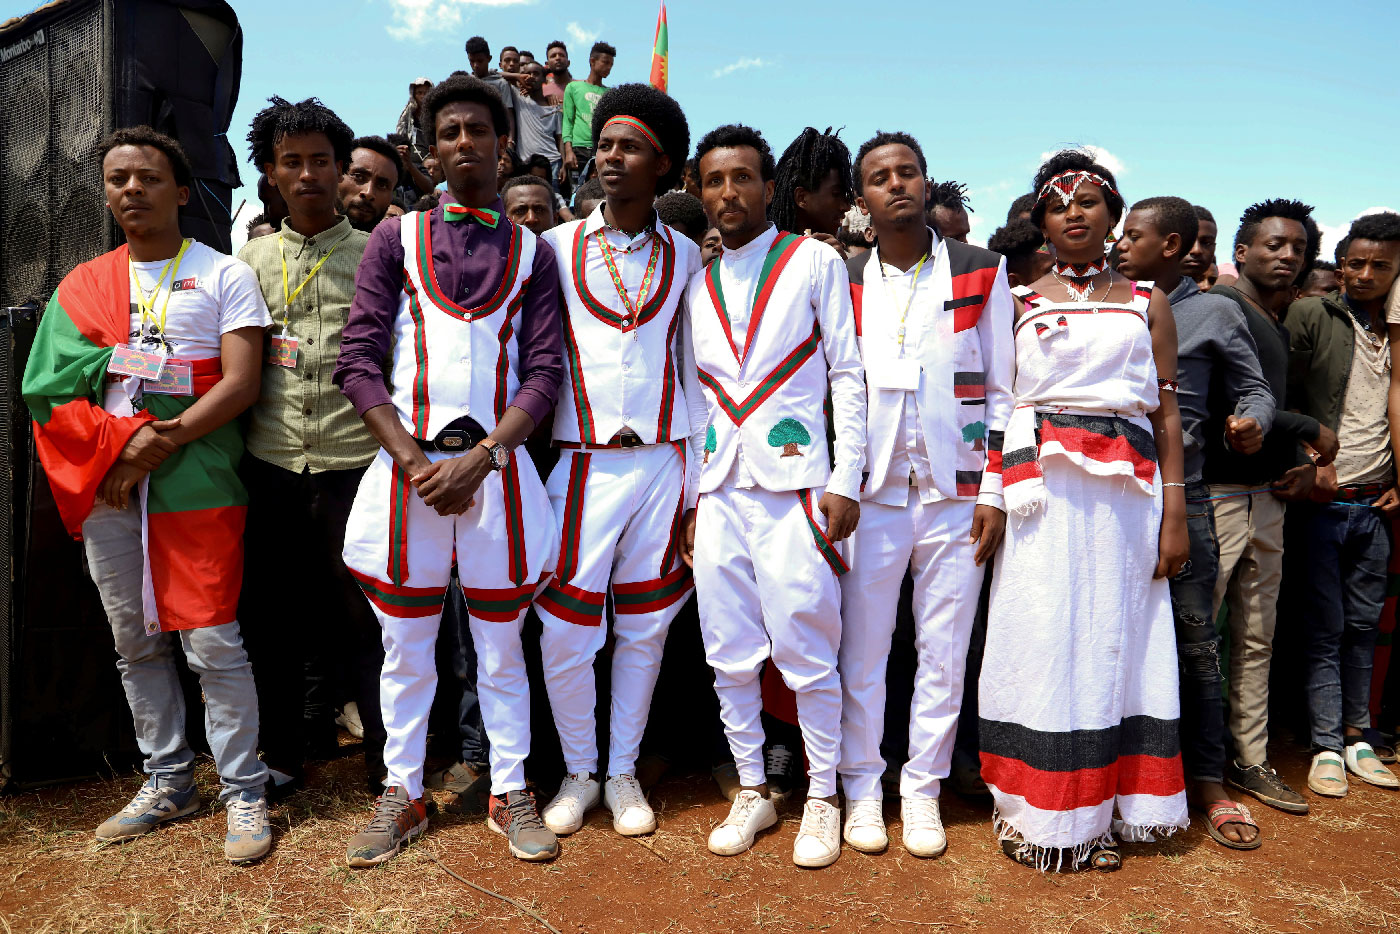 Youths wearing traditional Oromo costumes attend an Oromo Liberation Front (OLF) rally in the town of Woliso, Oromia Region, Ethiopia, October 21, 2018. 